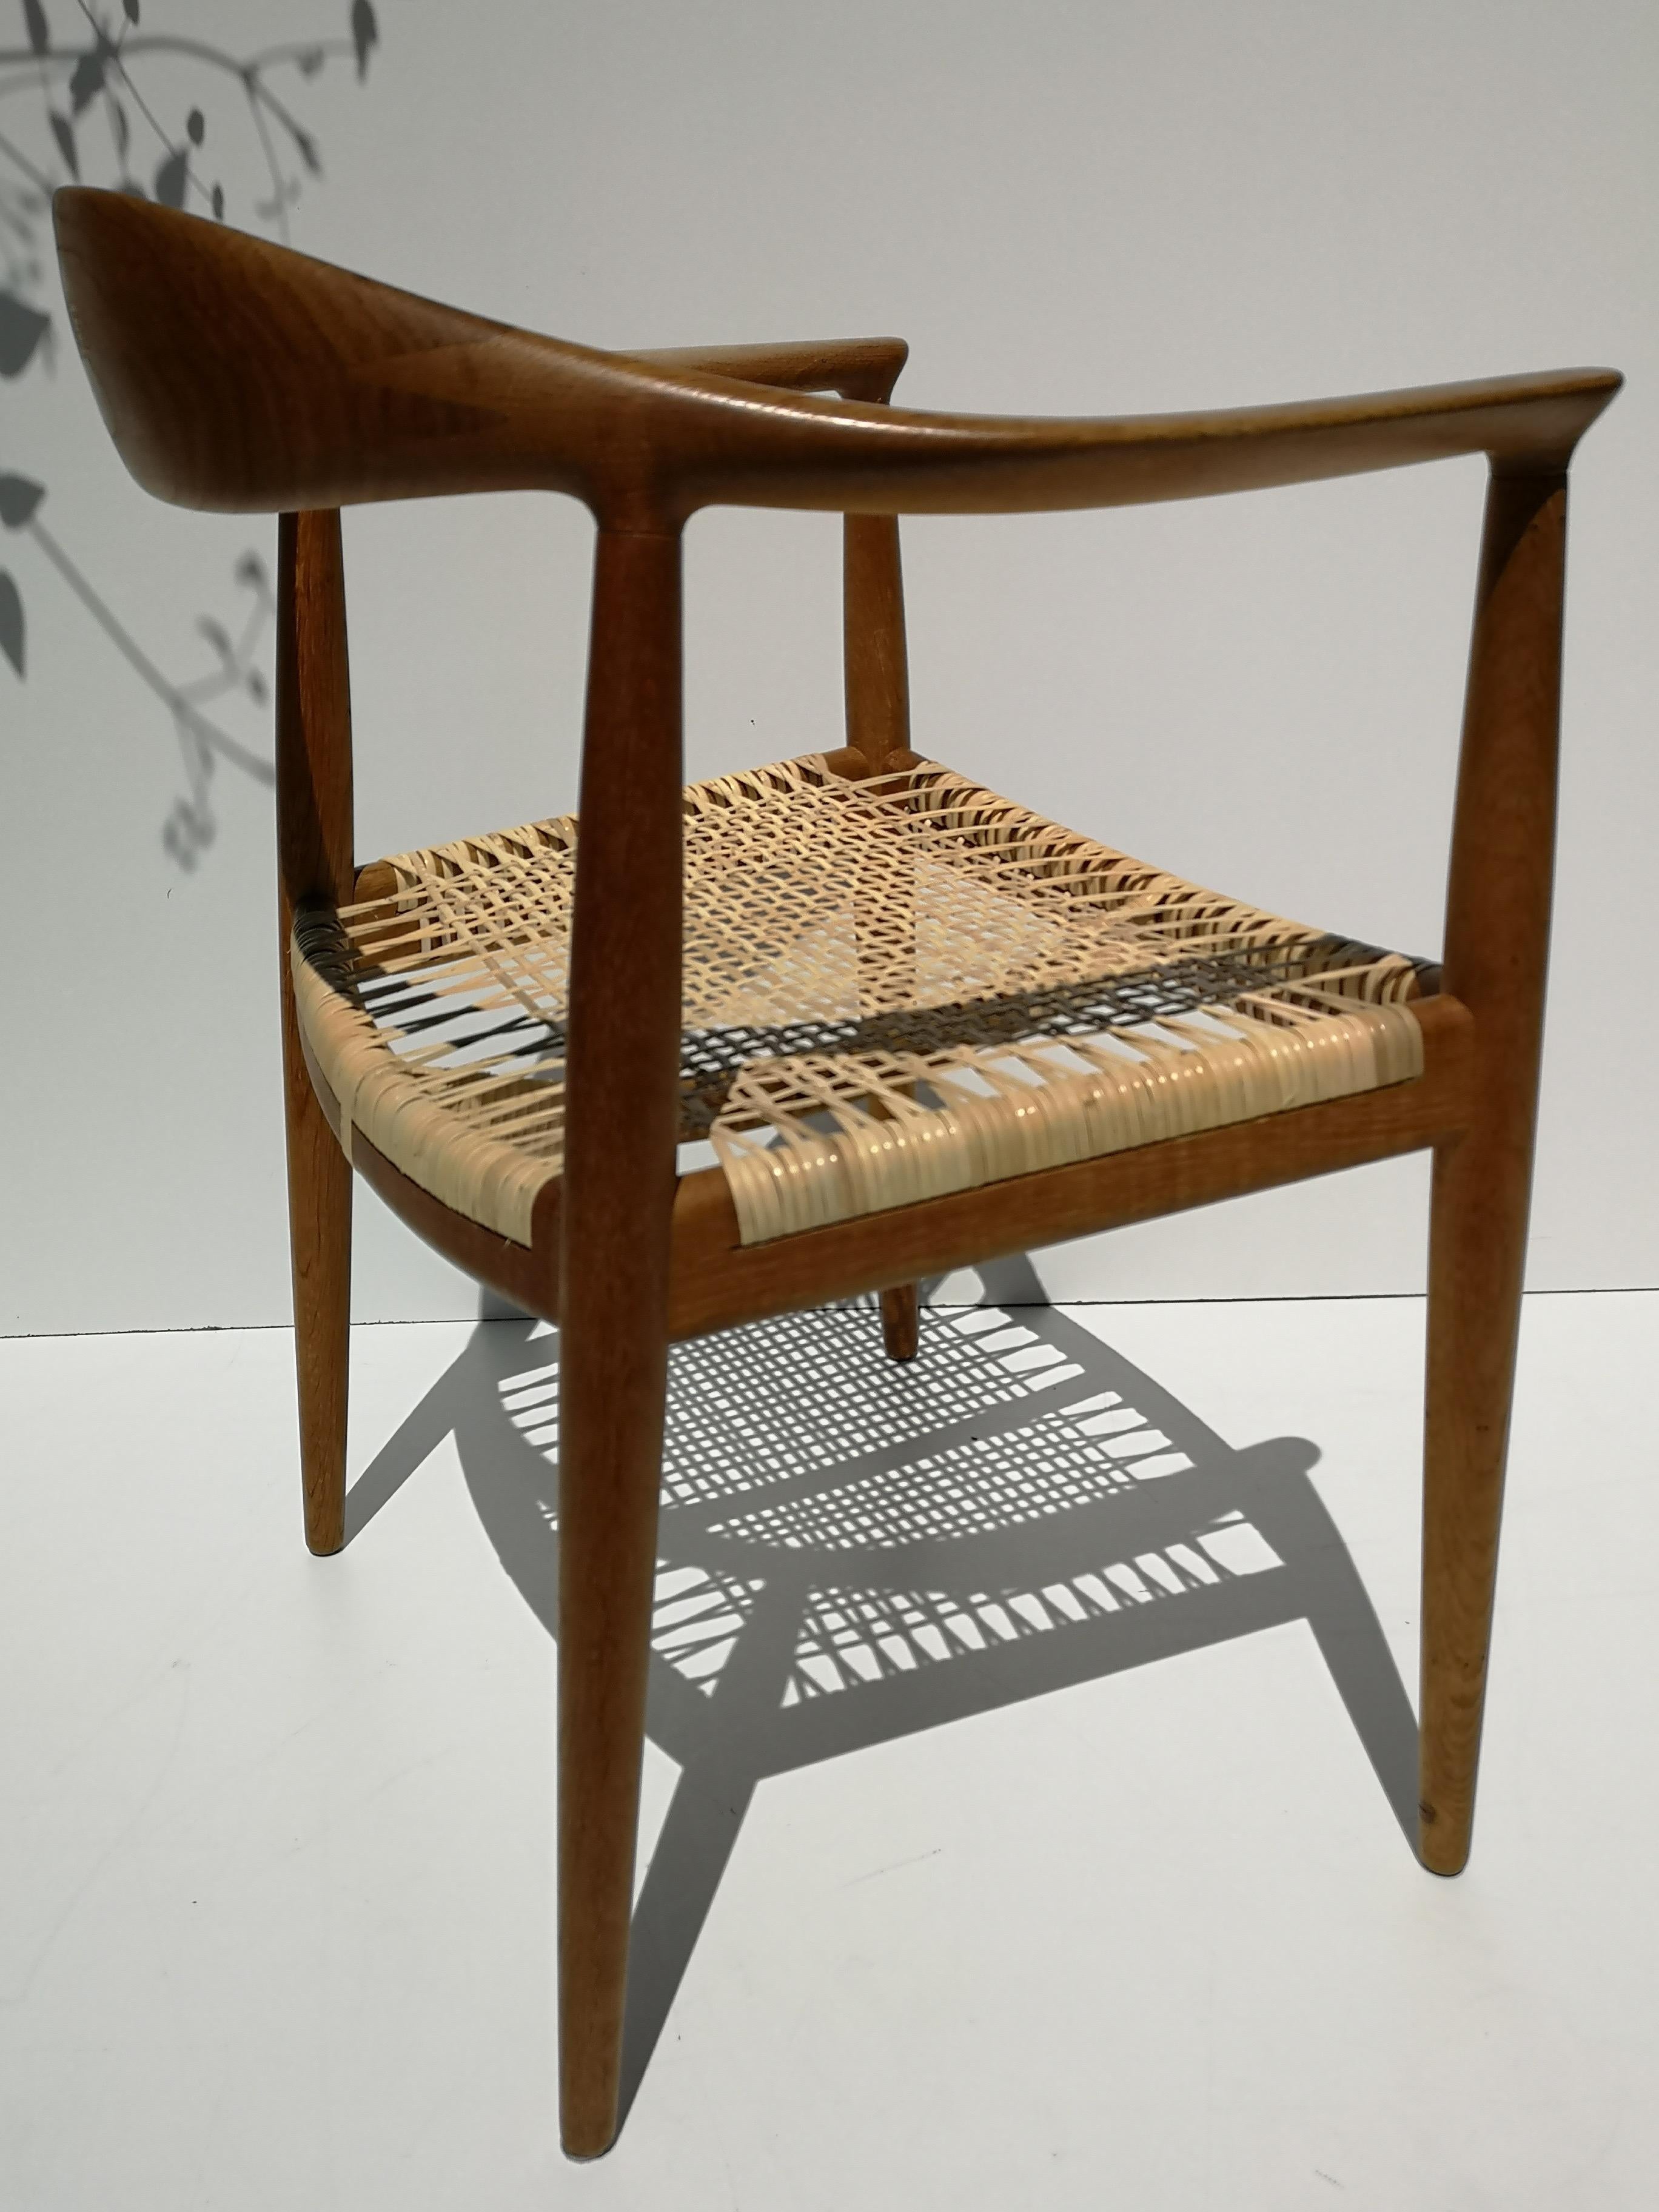 Early, and very rare variant of Hans Wegner's JH501 chair in oak and cane, by Johannes Hansen, circa 1950s. This uncommon piece features a two piece backrest, possibly produced for a short time between production of the JH501 and JH503. Freshly